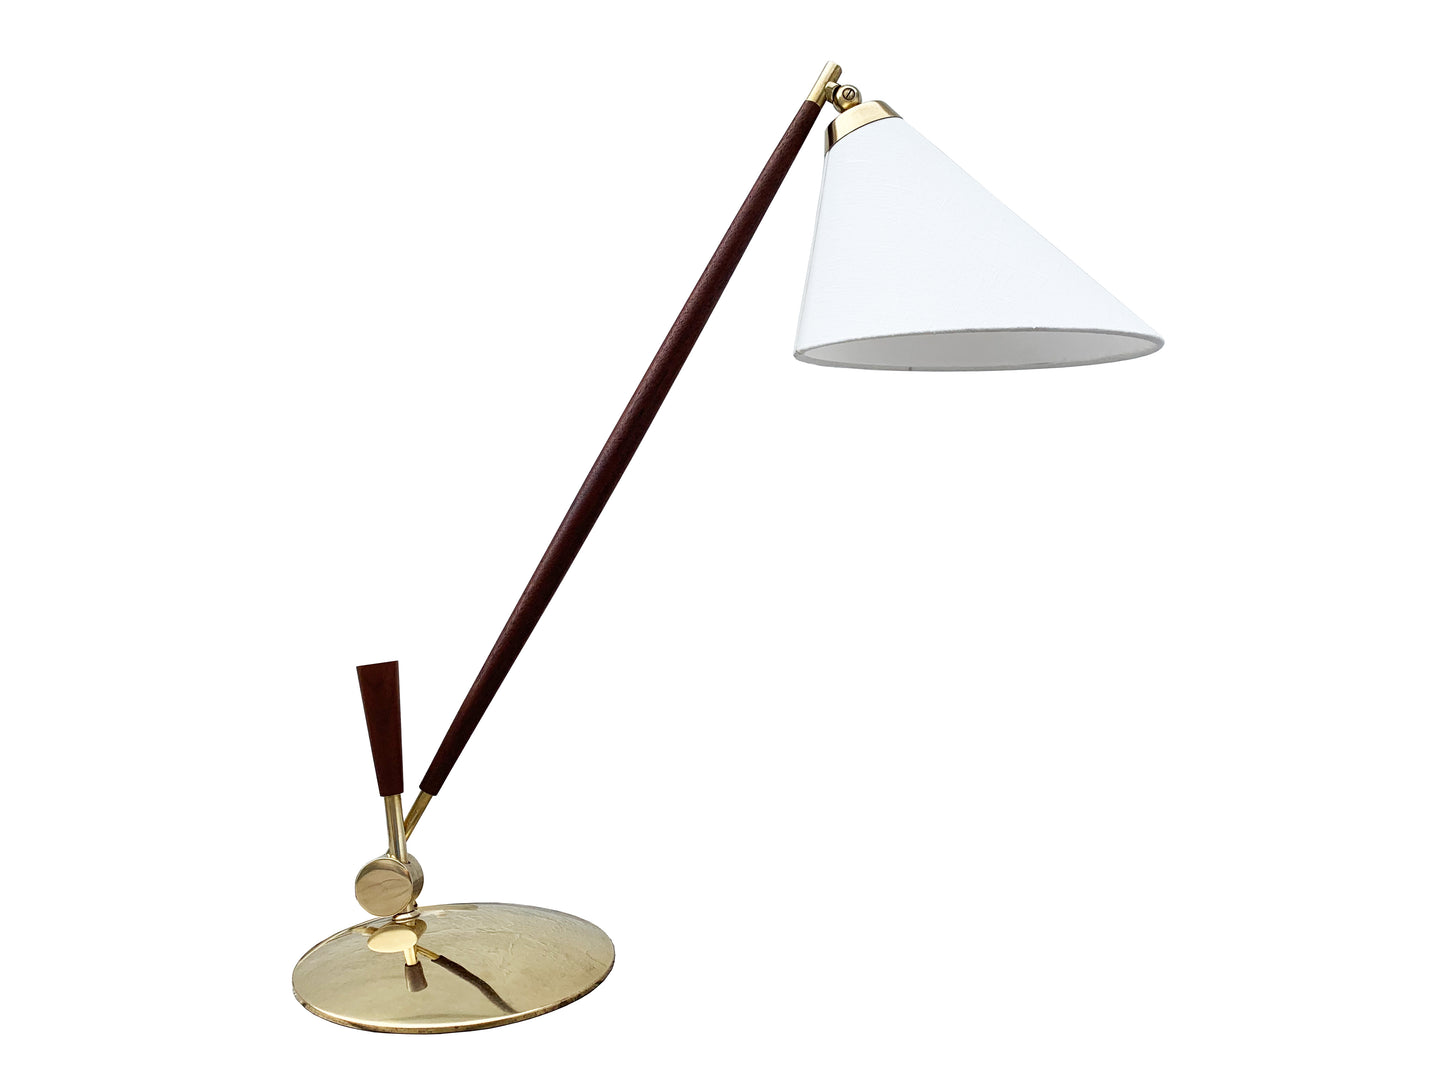 Th. Valentiner / Poul Dinesen. Teak And Brass Table Lamp, Mid-20th Century